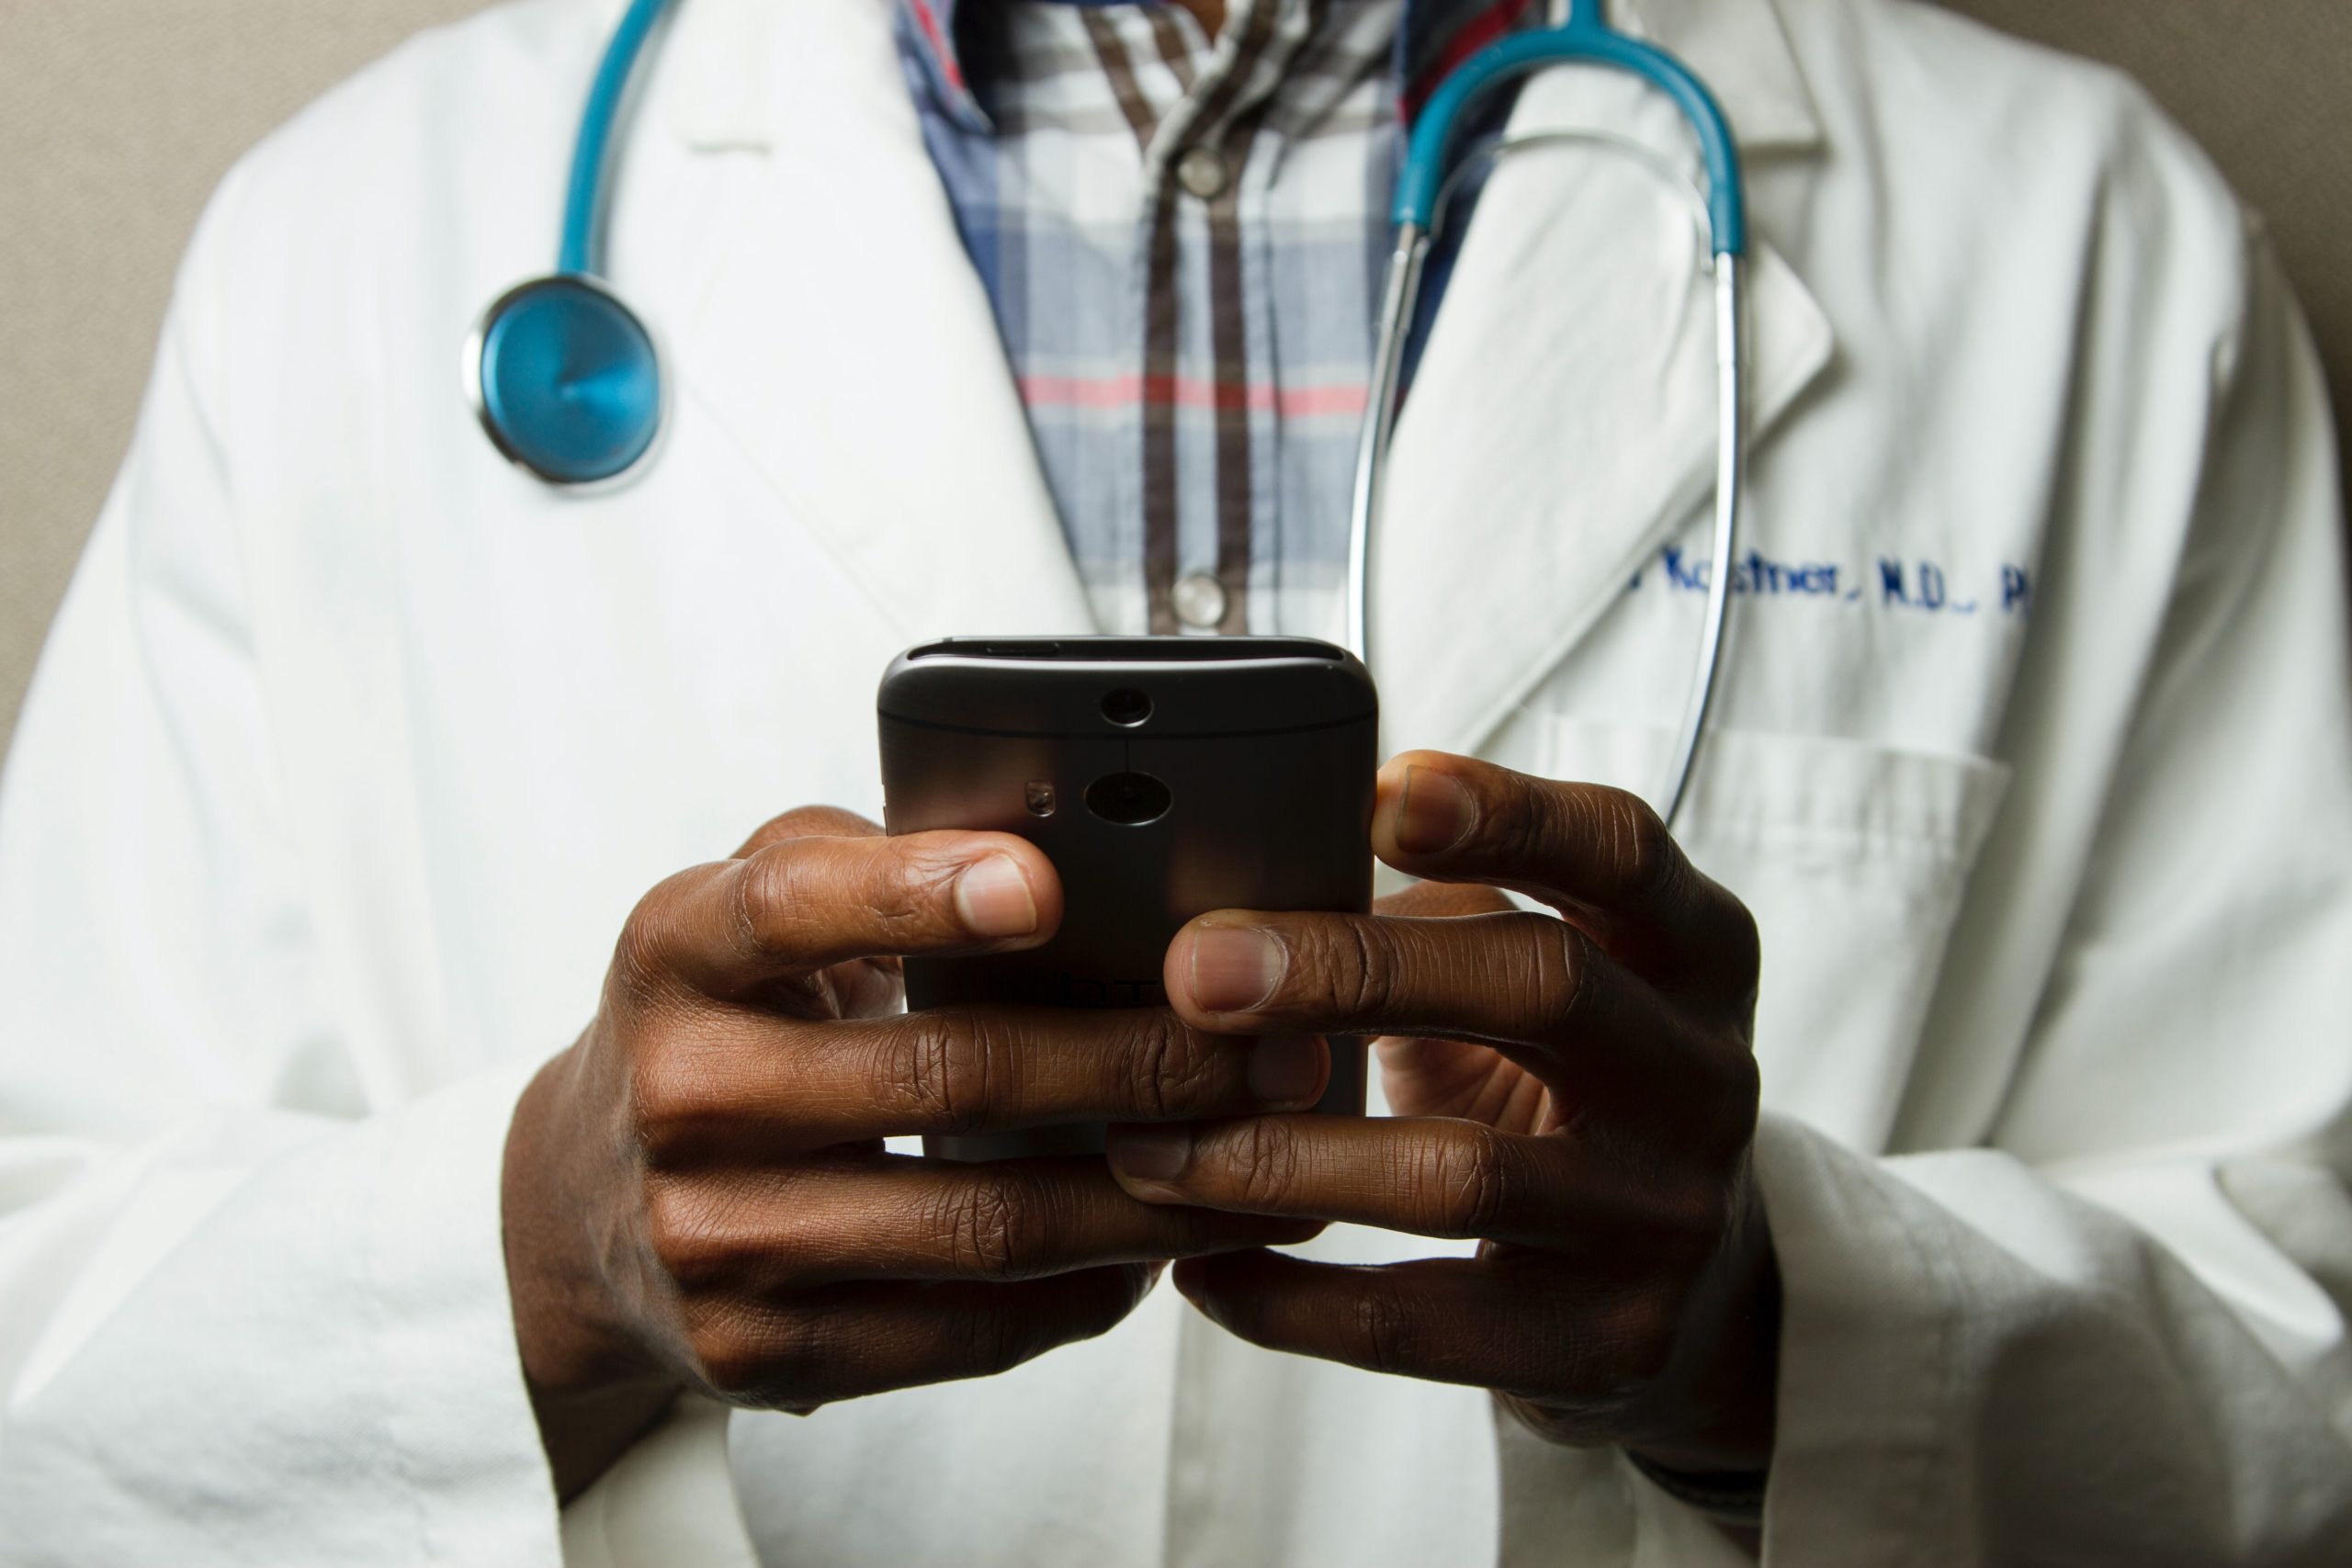 A healthcare professional is holding a smartphone in his hands